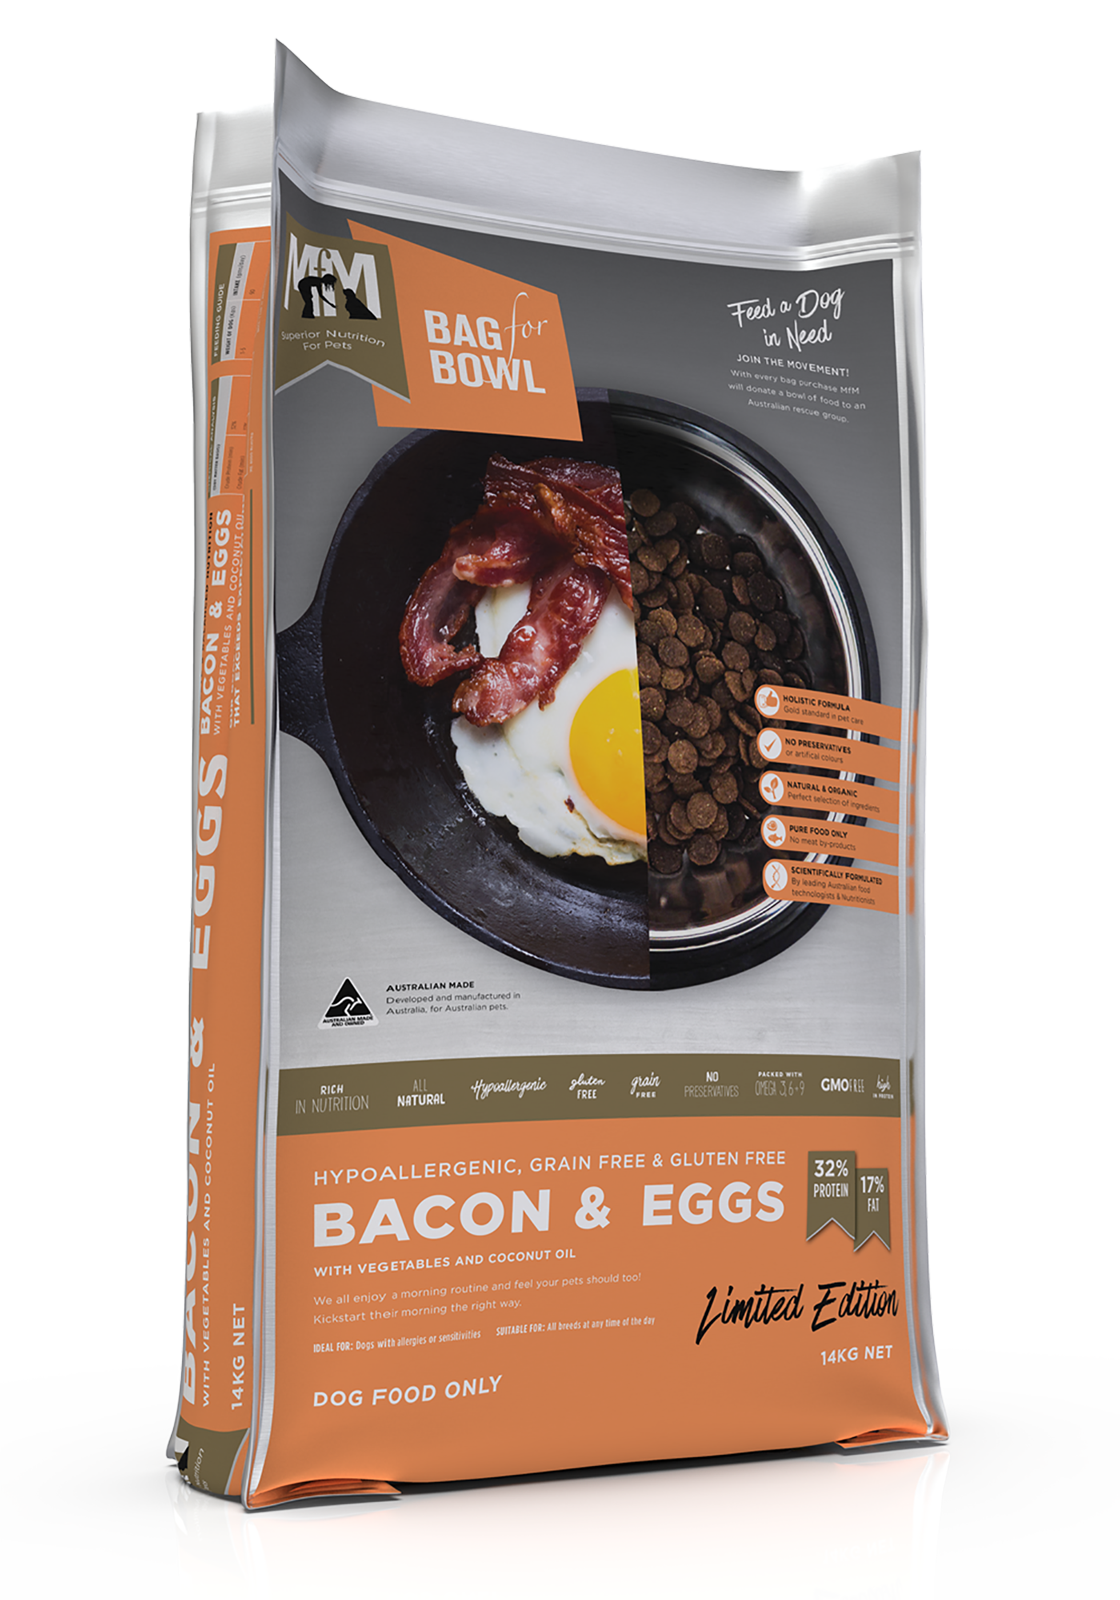 Meals for Mutts Bacon & Eggs Hypoallergenic GrainFree